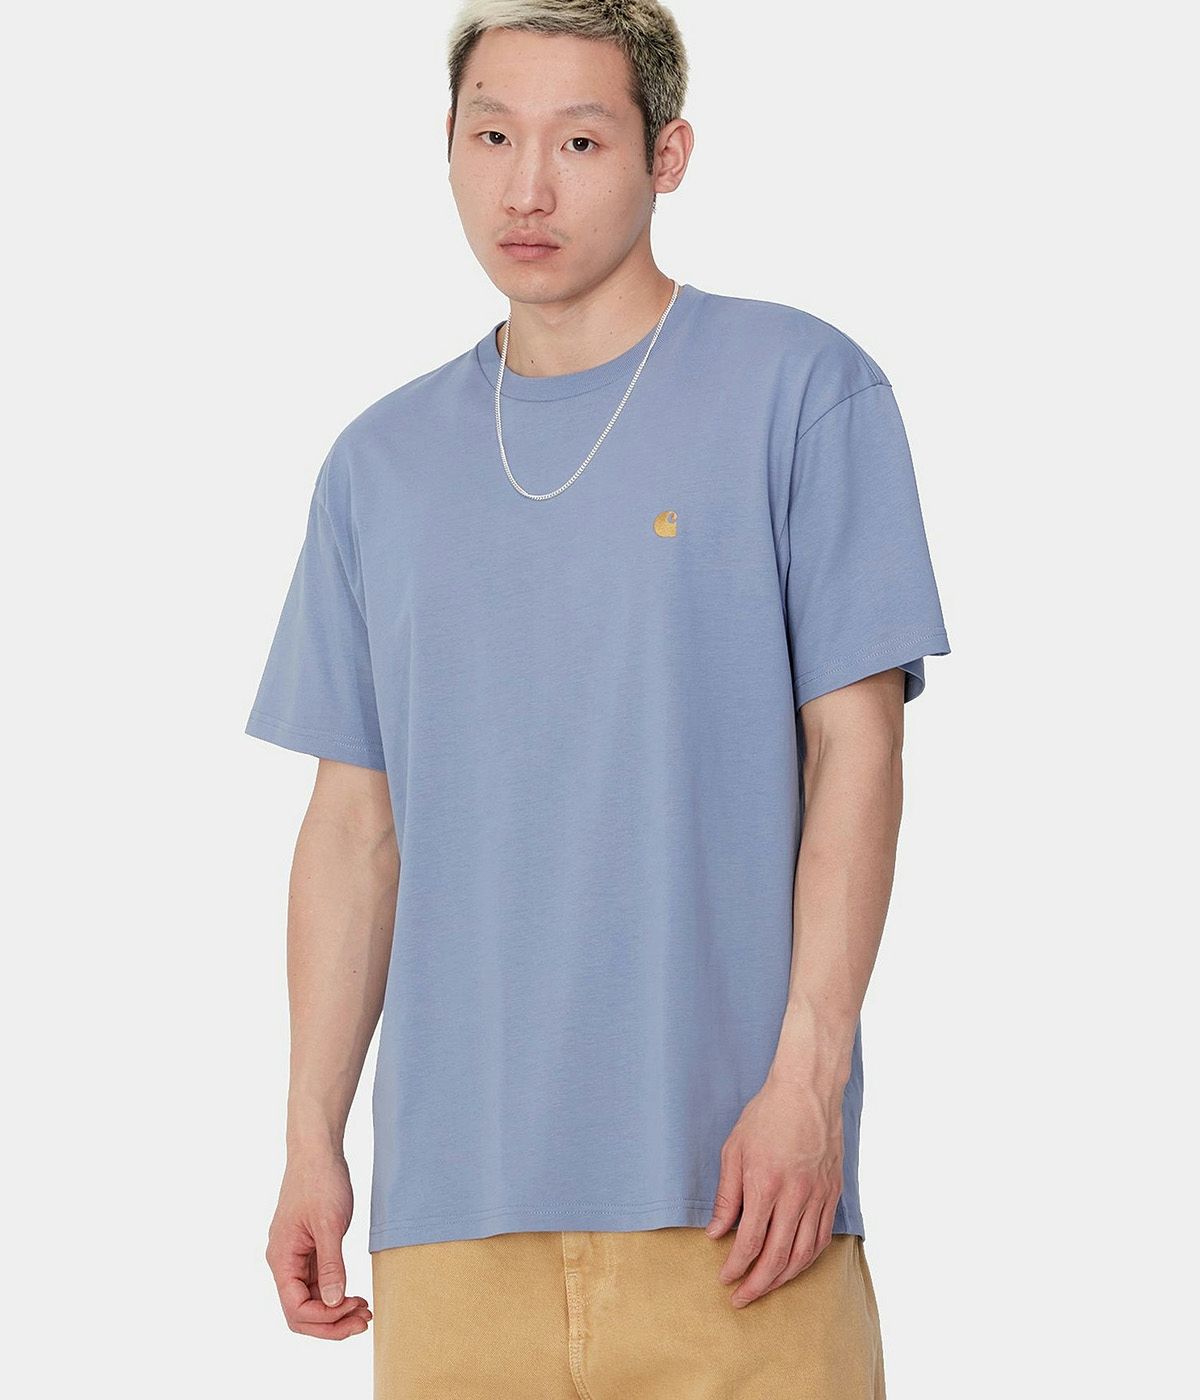 Carhartt T-shirt S/S Chase Charm Blue / Gold